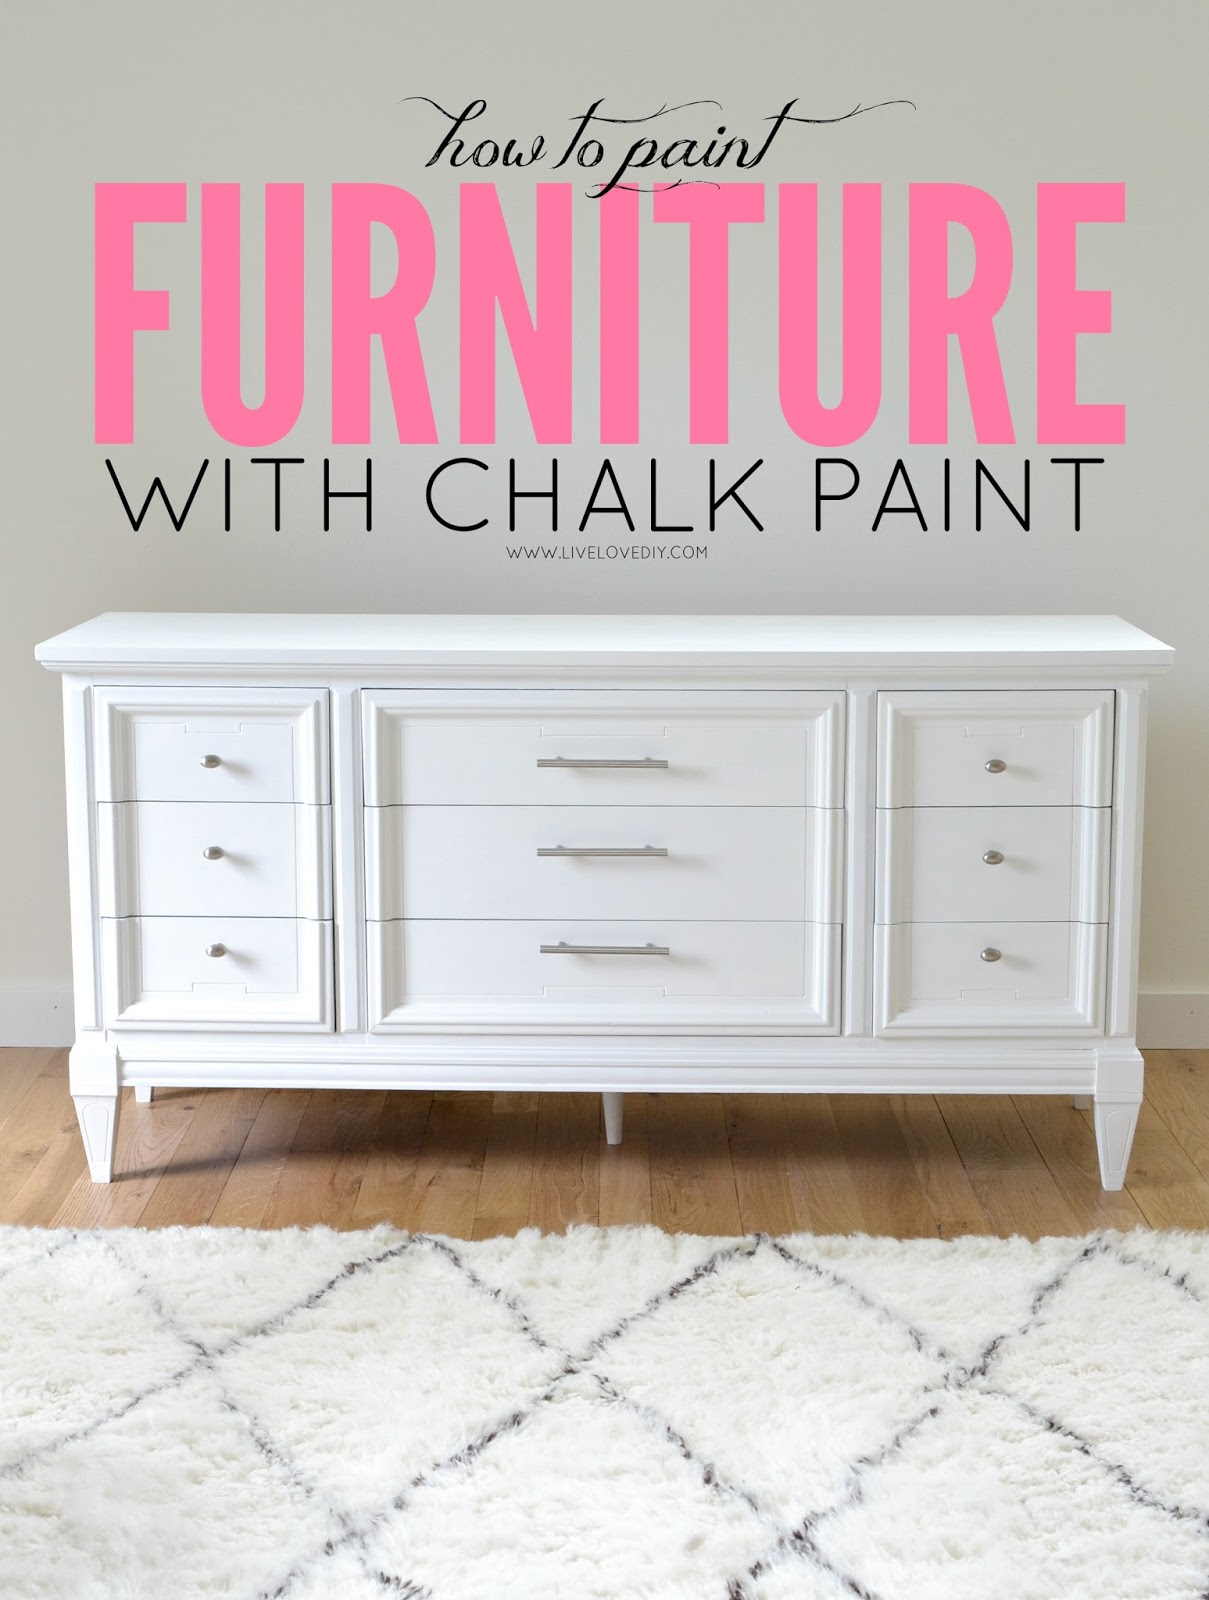 LiveLoveDIY: How To Paint Furniture with Chalk Paint (and how to